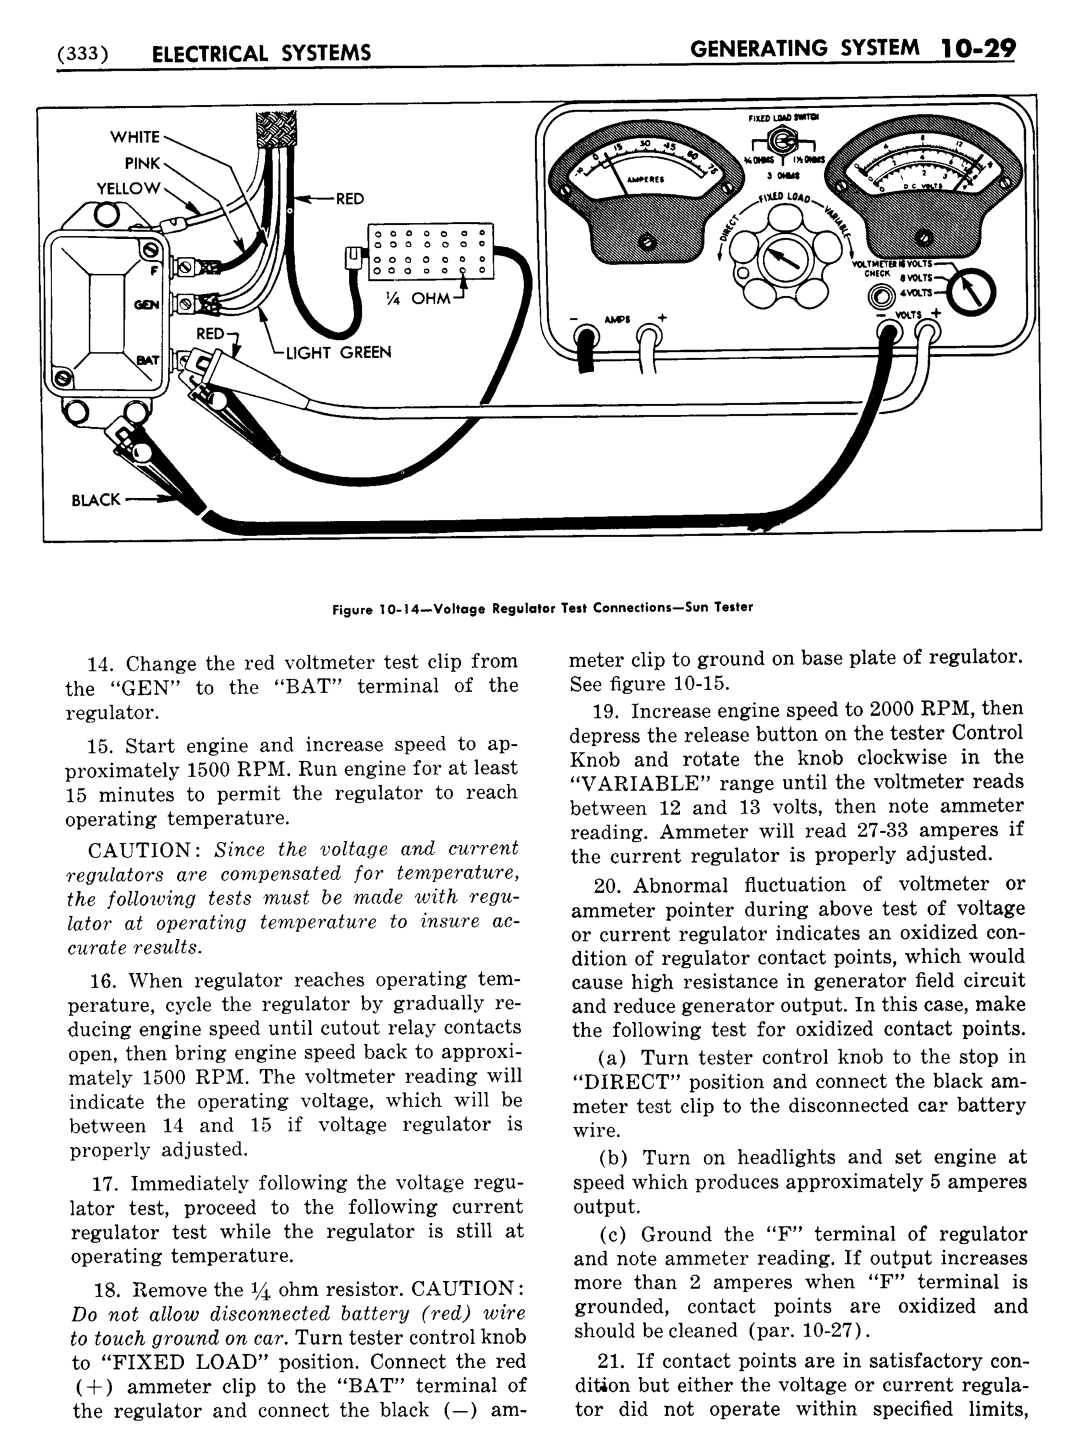 n_11 1955 Buick Shop Manual - Electrical Systems-029-029.jpg